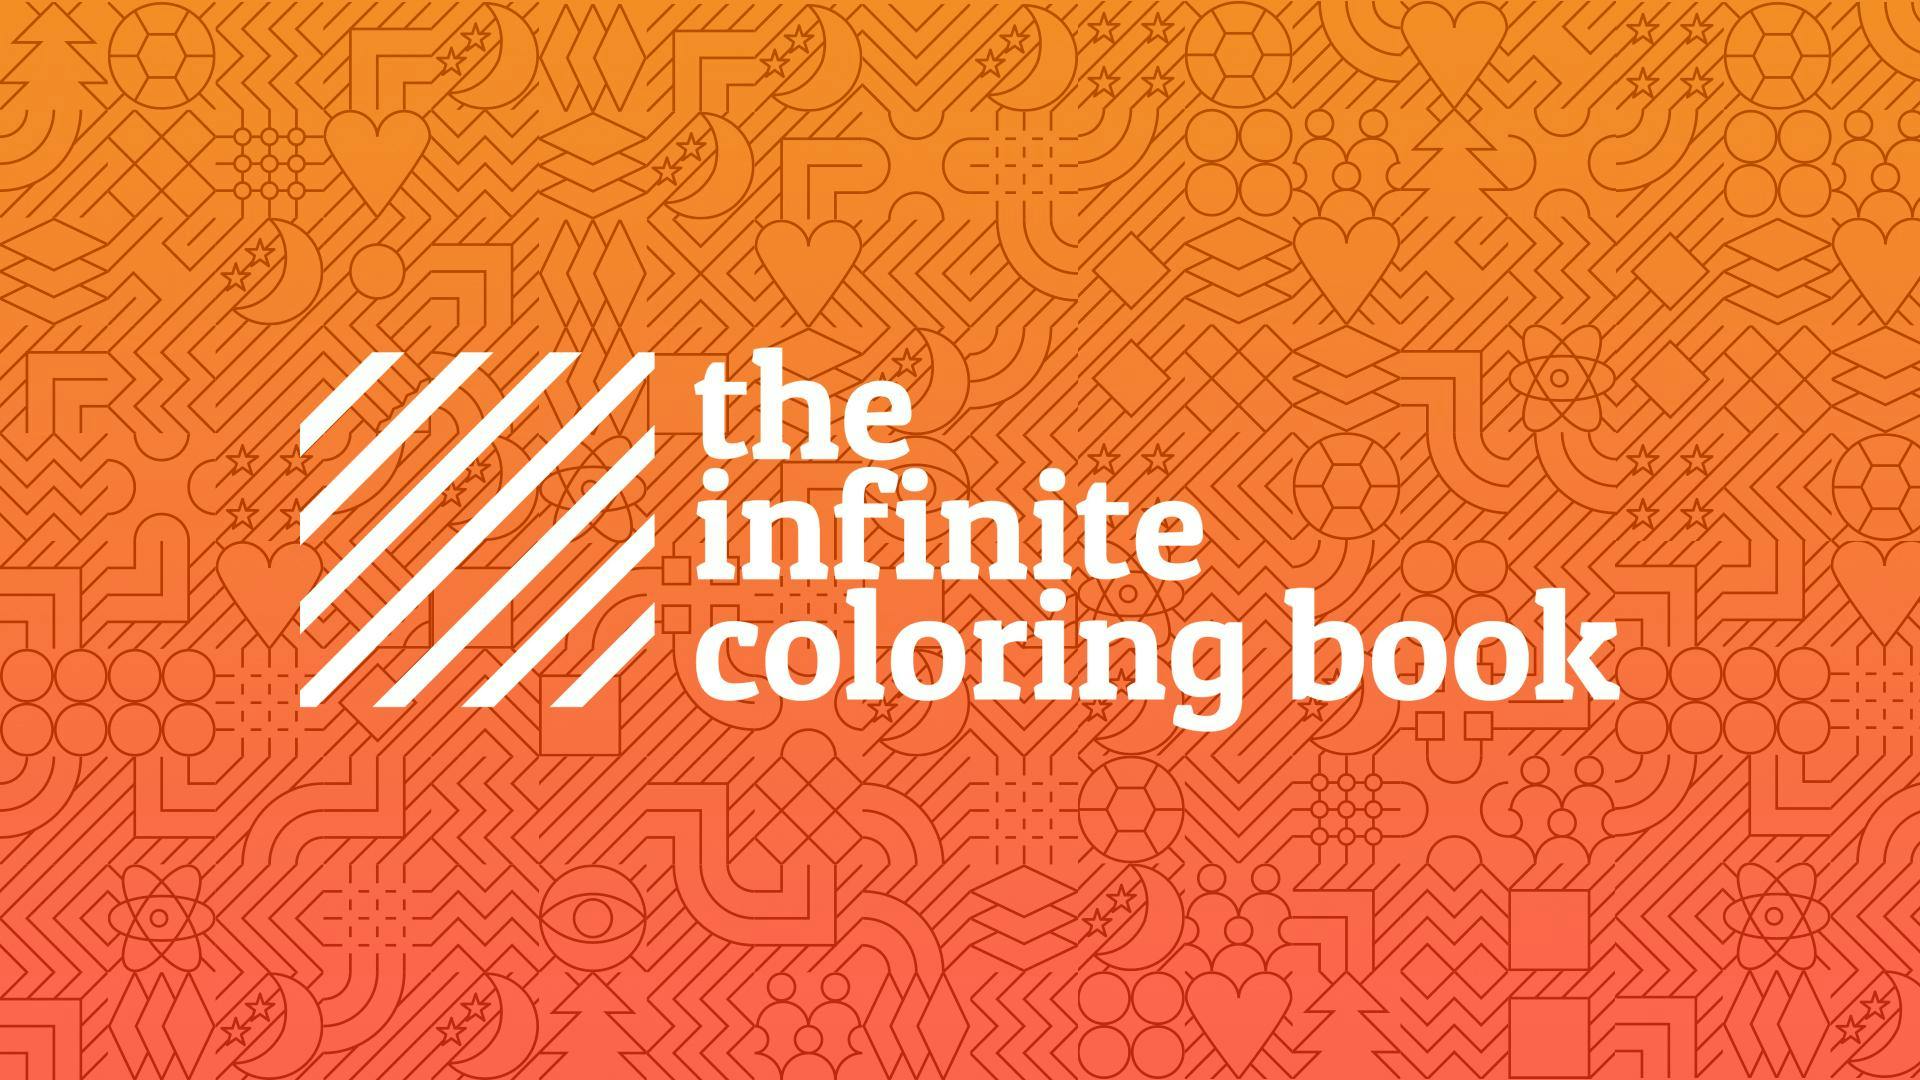 infinite coloring book logo on a patterned orange background